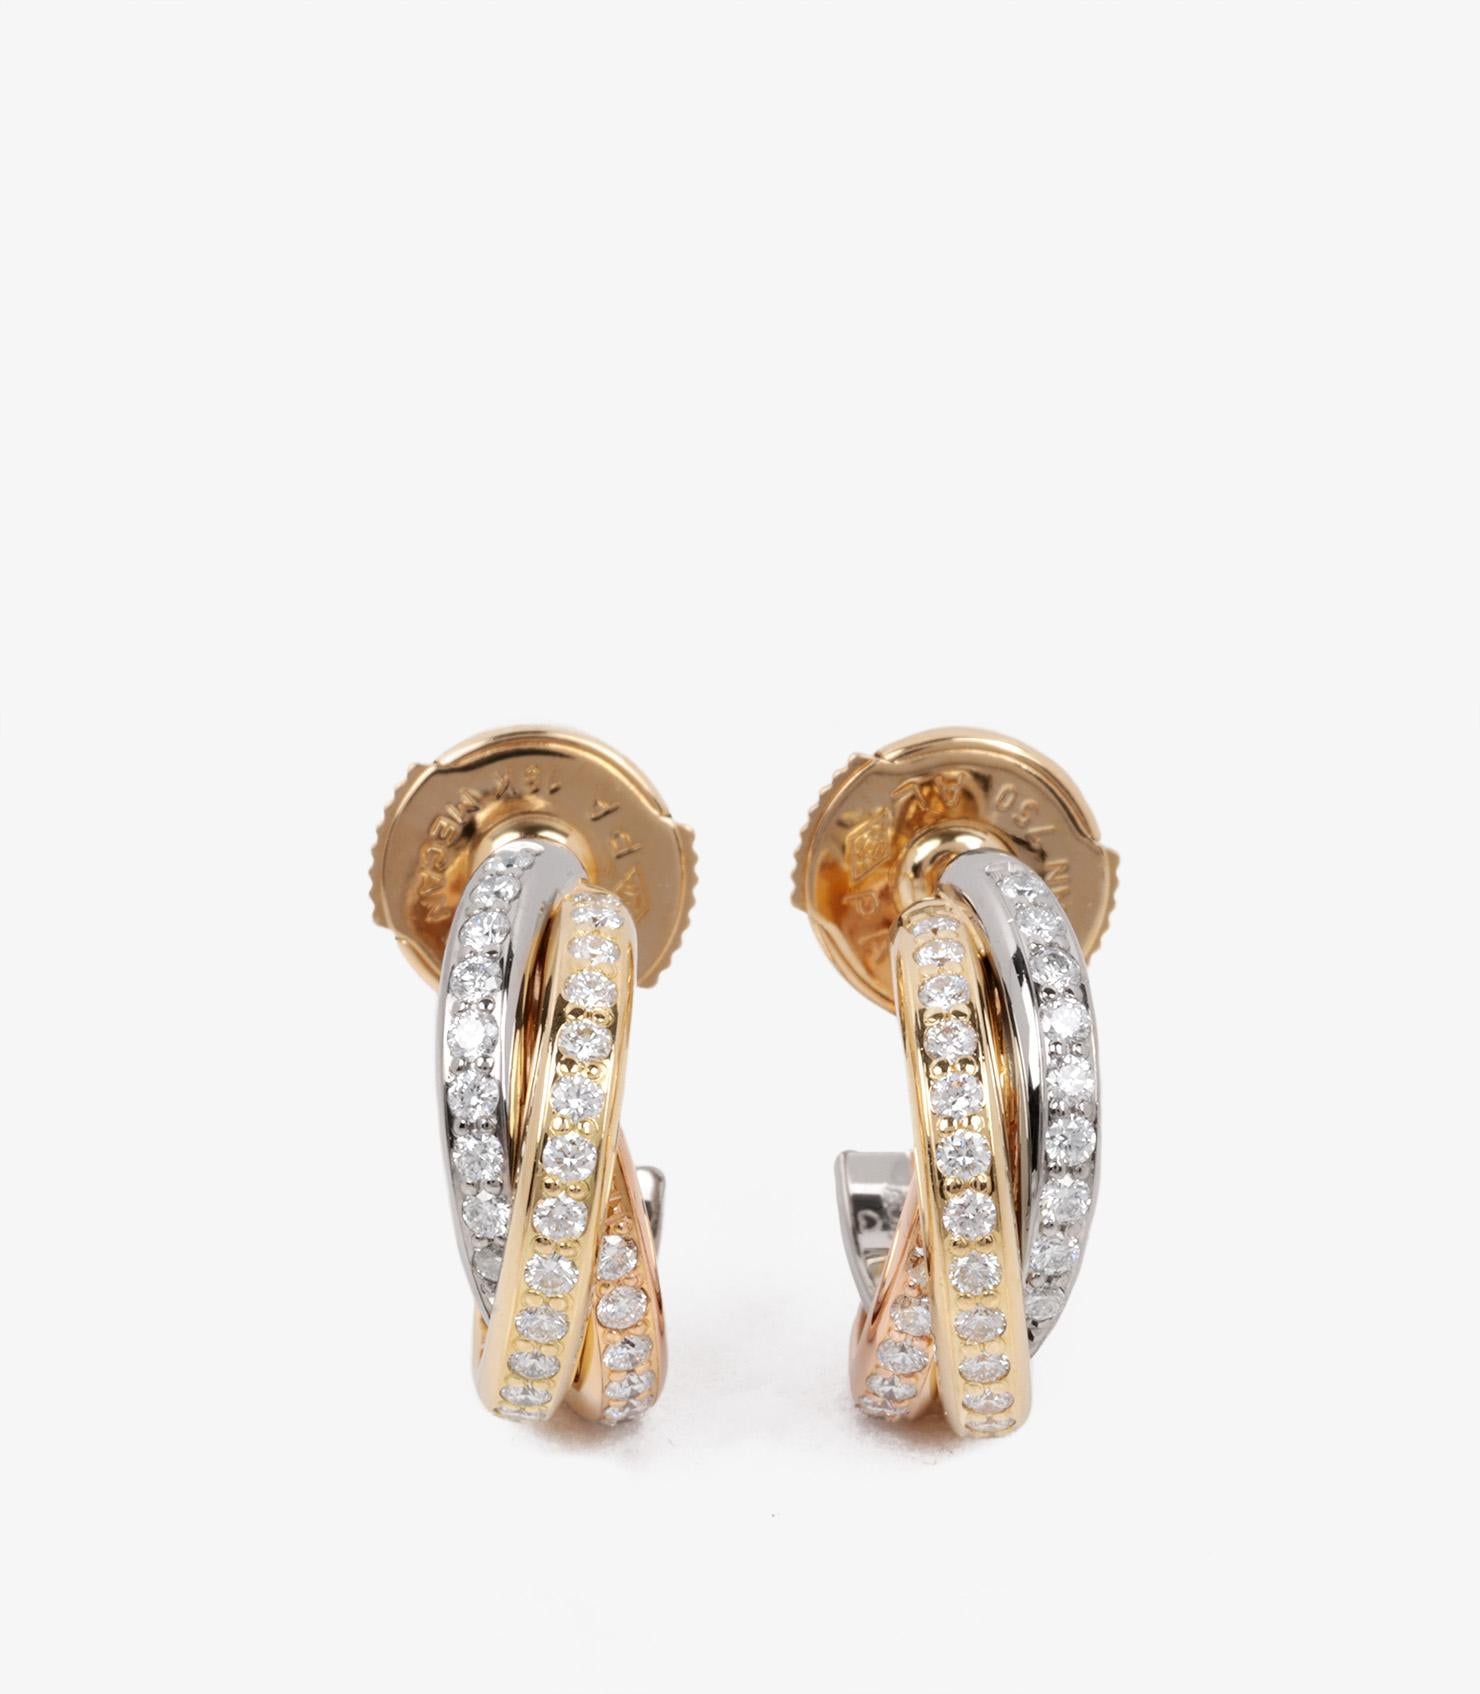 Cartier Diamond Set 18ct White, Yellow And Rose Gold Hoop Earrings In Excellent Condition For Sale In Bishop's Stortford, Hertfordshire